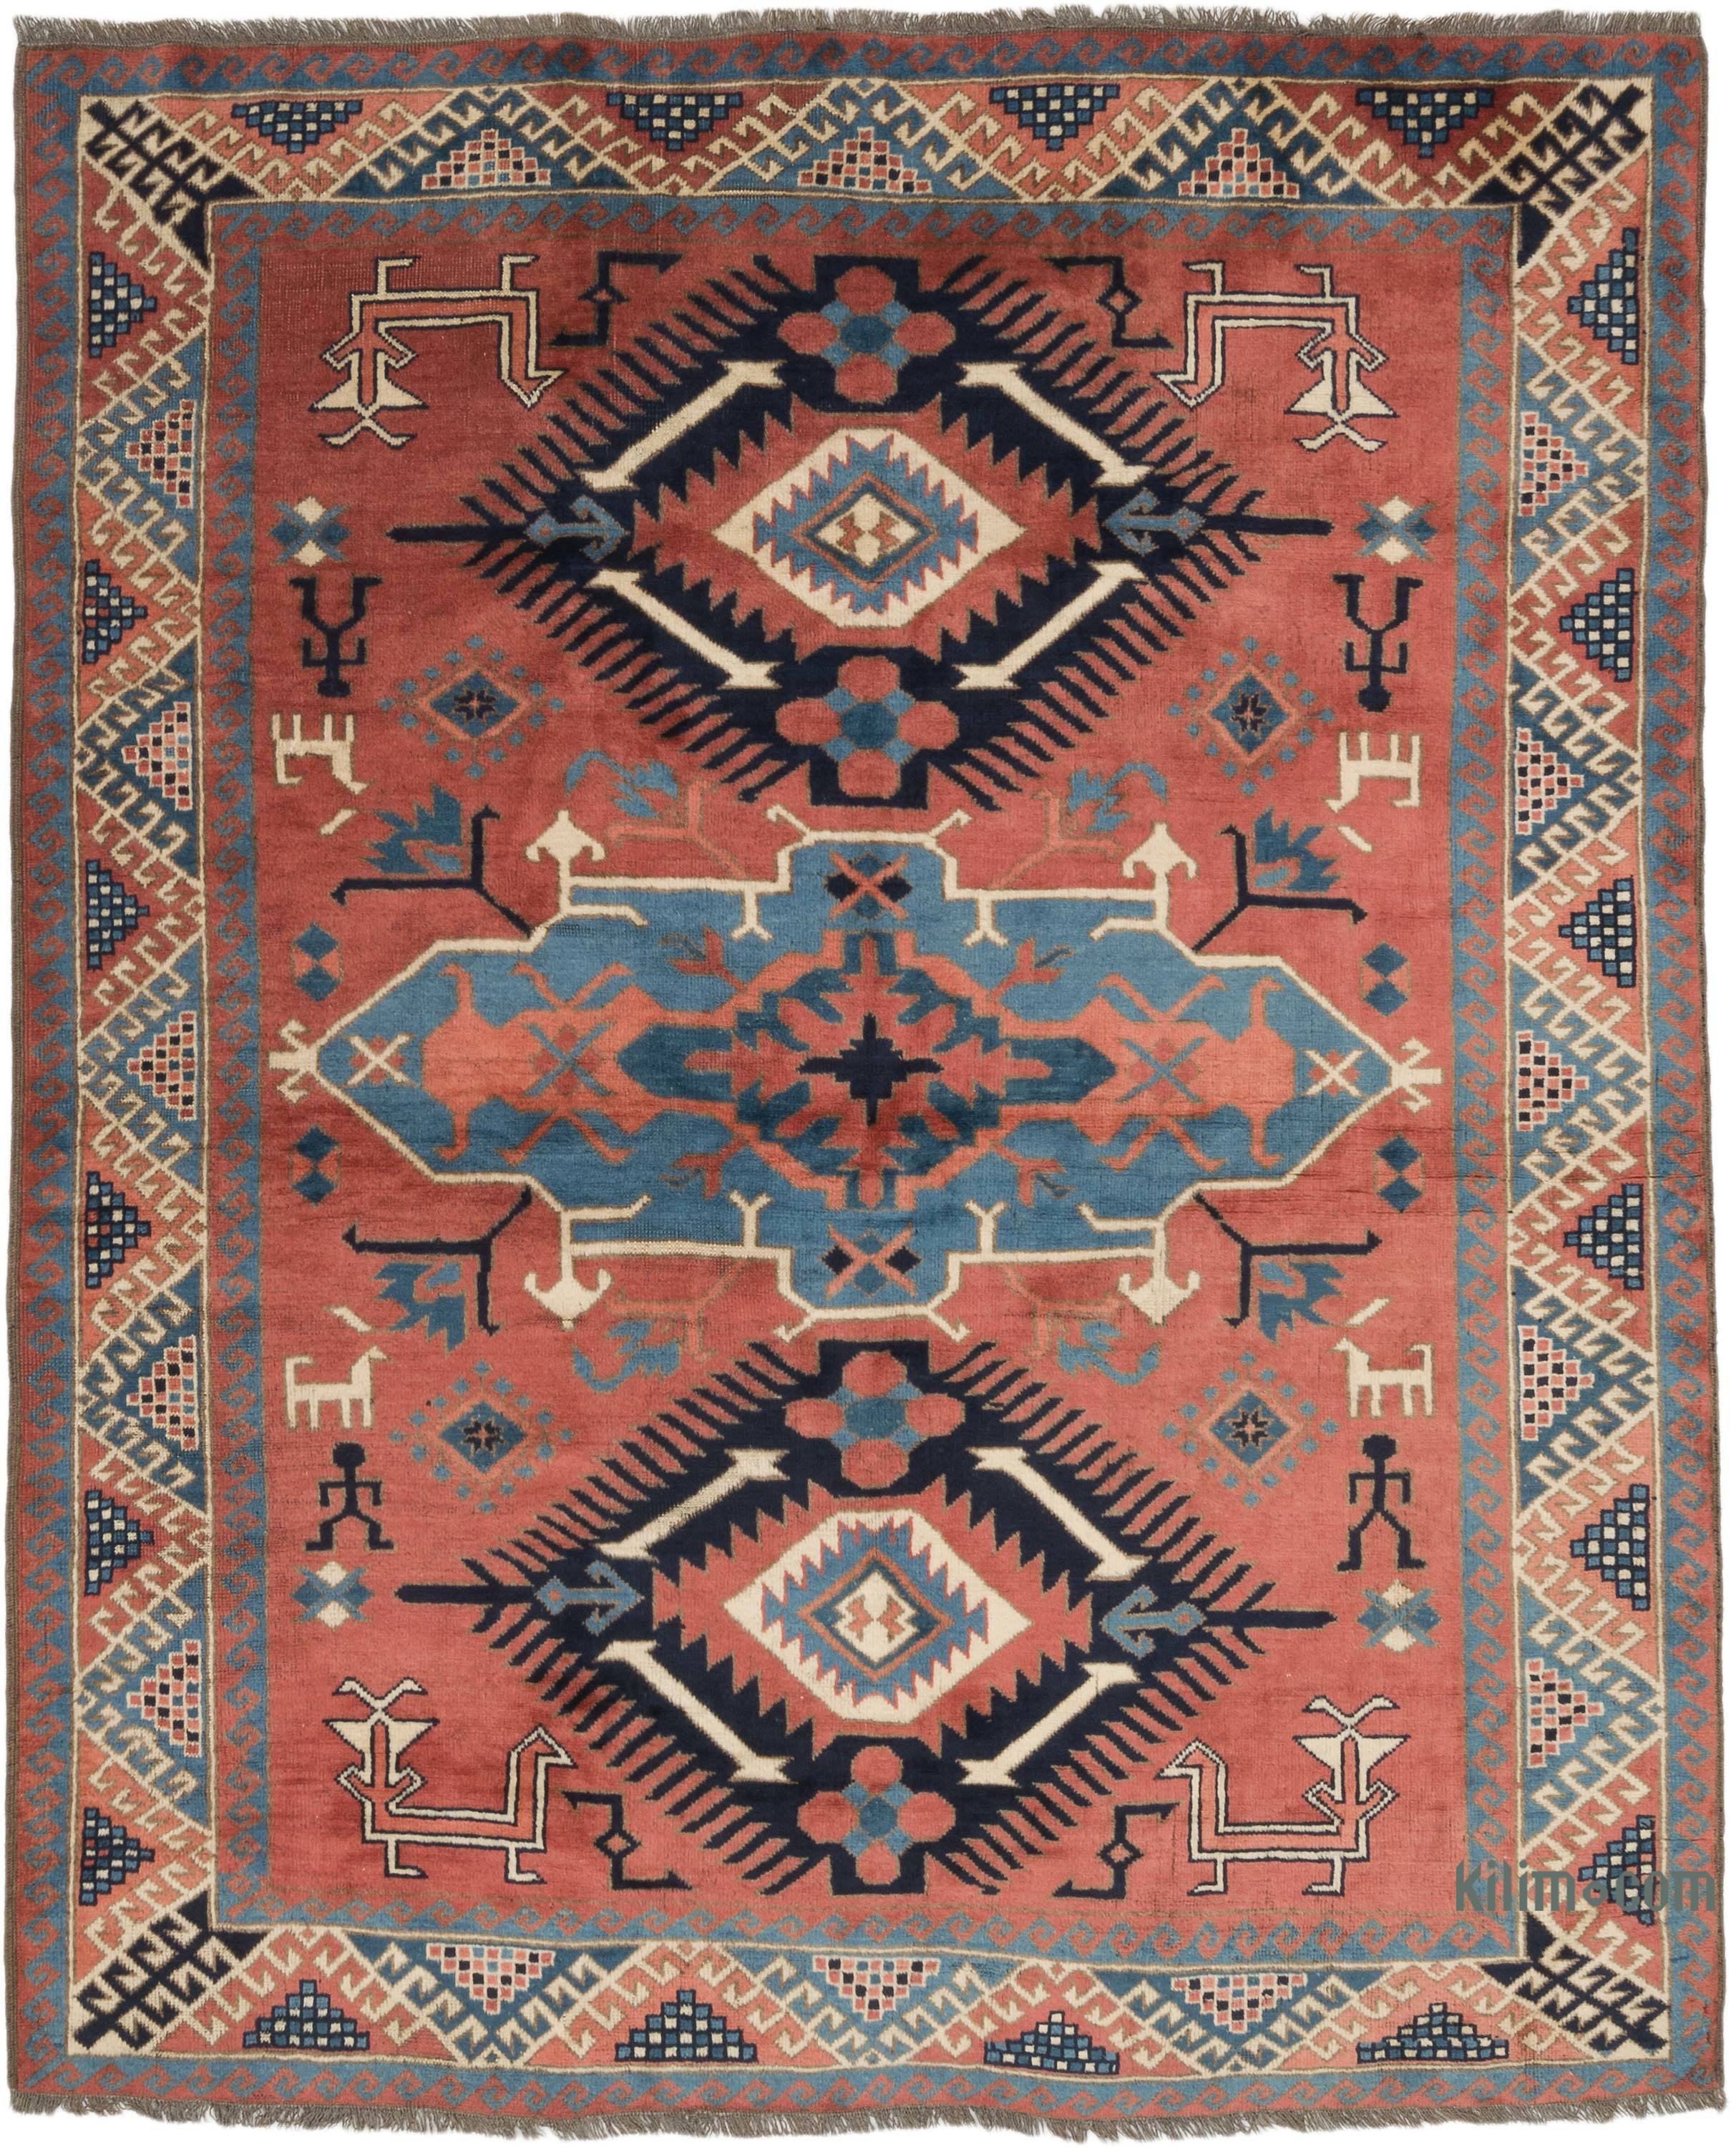 K0069879 Vintage Turkish Hand-Knotted Rug - 2' 4 x 3' 2 (28 x 38)  The  Source for Vintage Rugs, Tribal Kilim Rugs, Wool Turkish Rugs, Overdyed  Persian Rugs, Runner Rugs, Patchwork